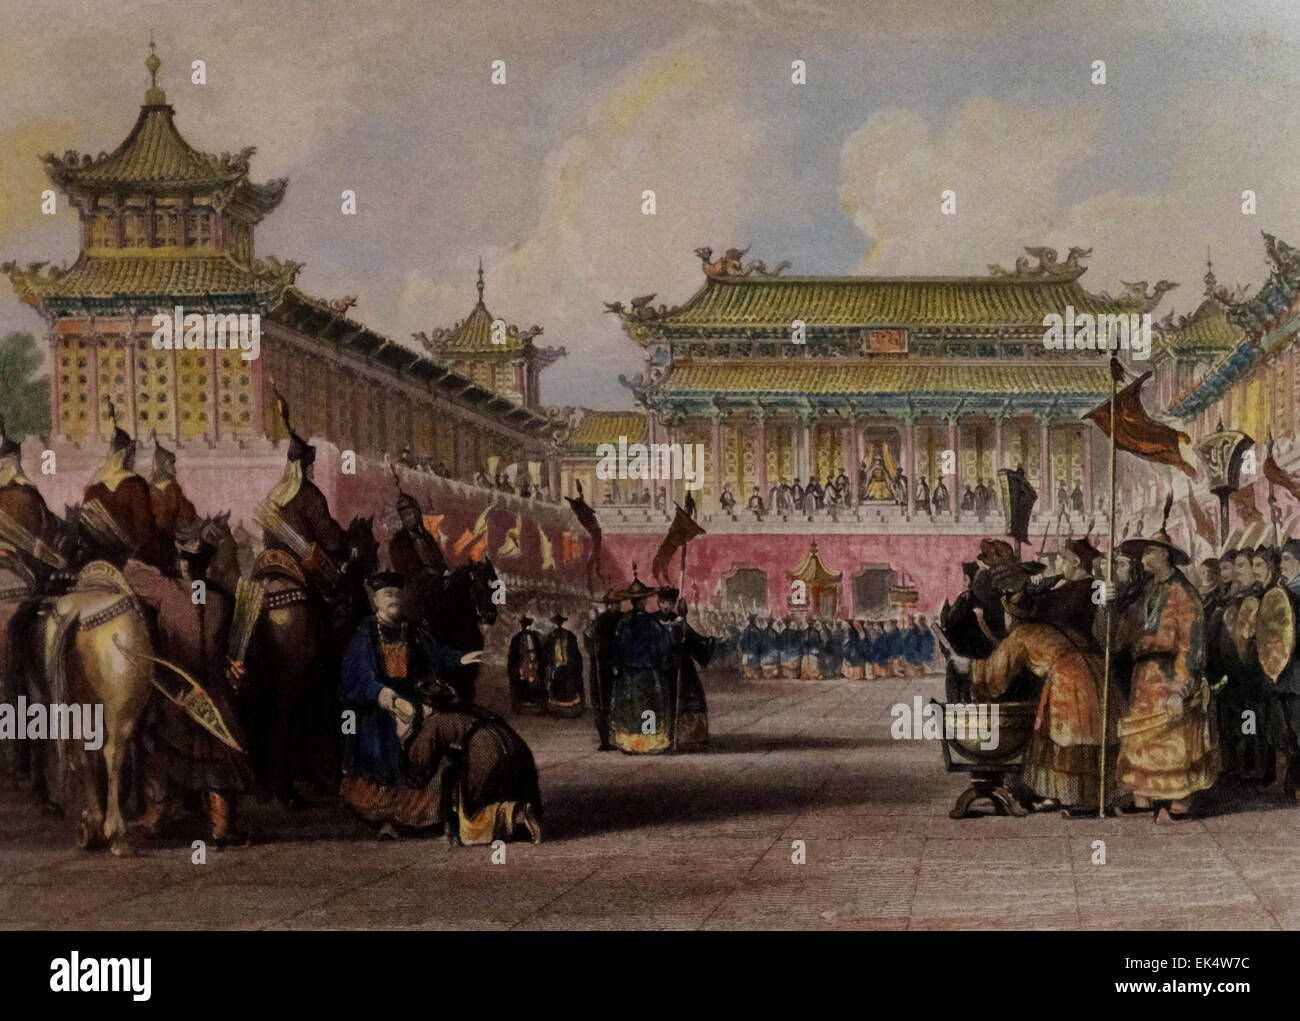 The Emperor Daoguang Reviewing his Guards, Palace of Peking, China, 19th Century Stock Photo